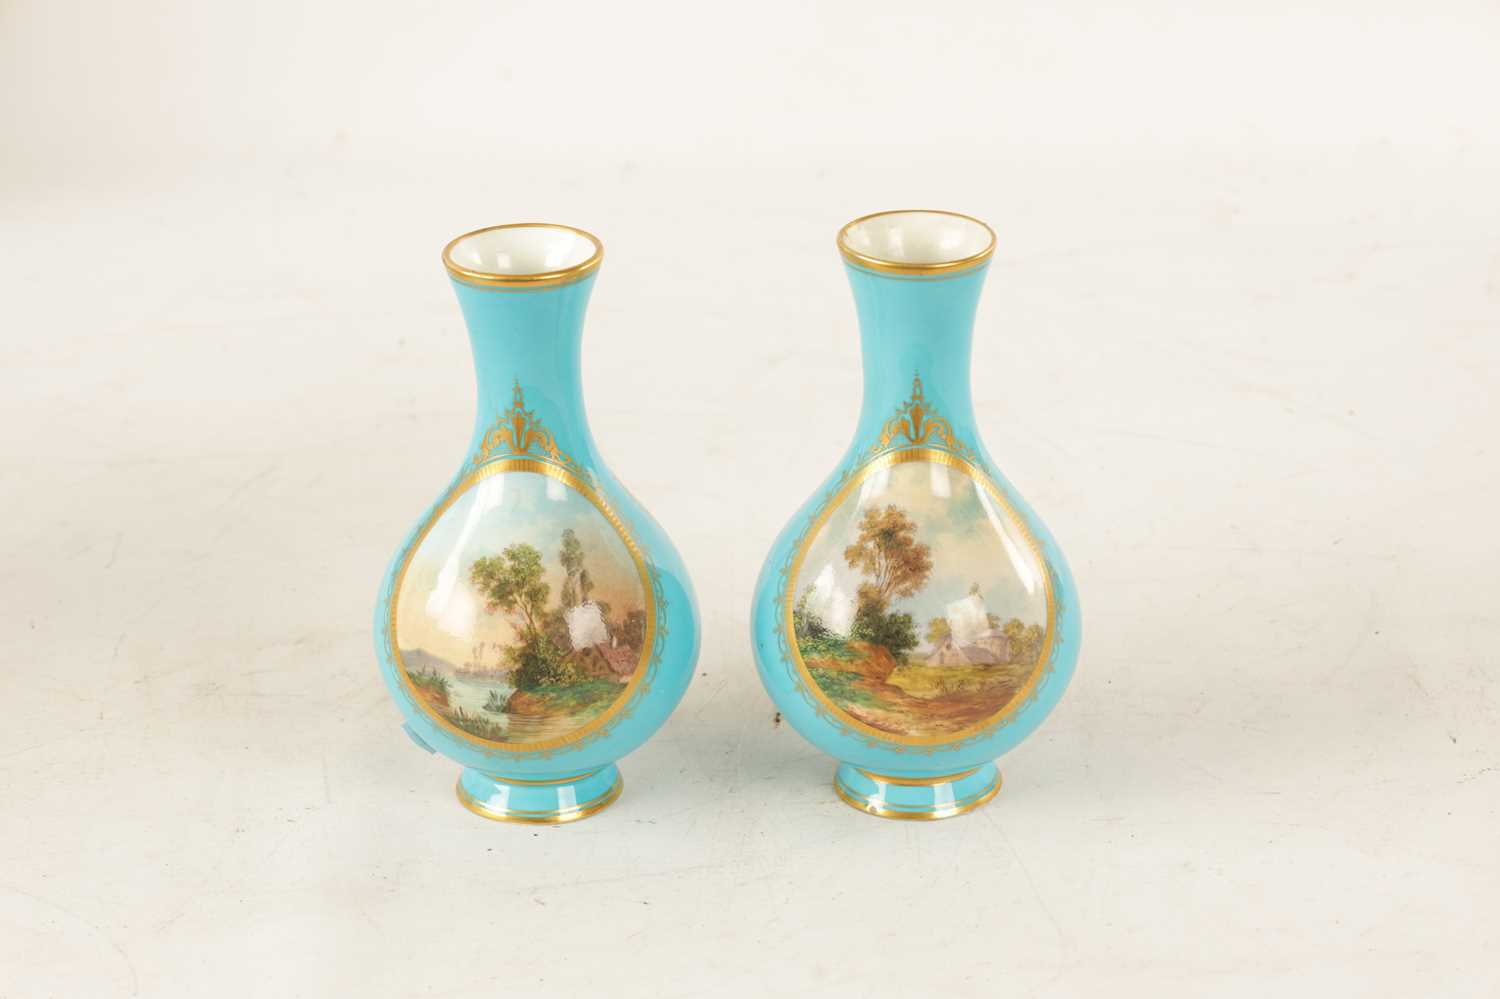 A PAIR OF 19TH CENTURY FRENCH SERVES PORCELAIN VASES - Image 6 of 11